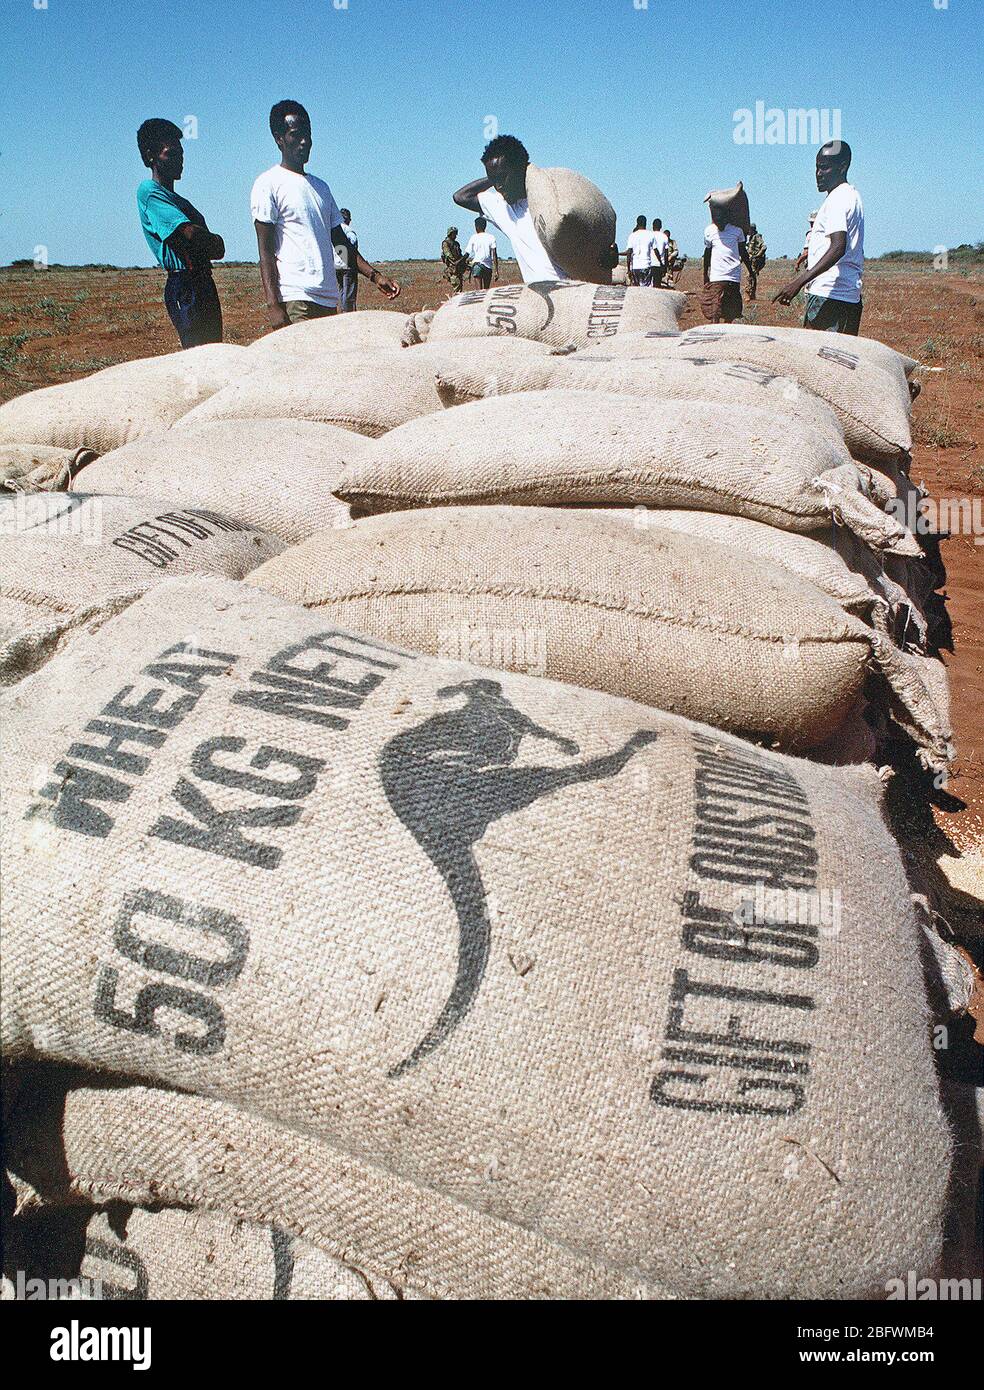 1993 - Men from the village of Maleel Somalia stack bags of wheat delivered by Marine Heavy Helicopter Squadron 363 (HMH-363) during the multinational relief effort Operation Restore Hope. Stock Photo